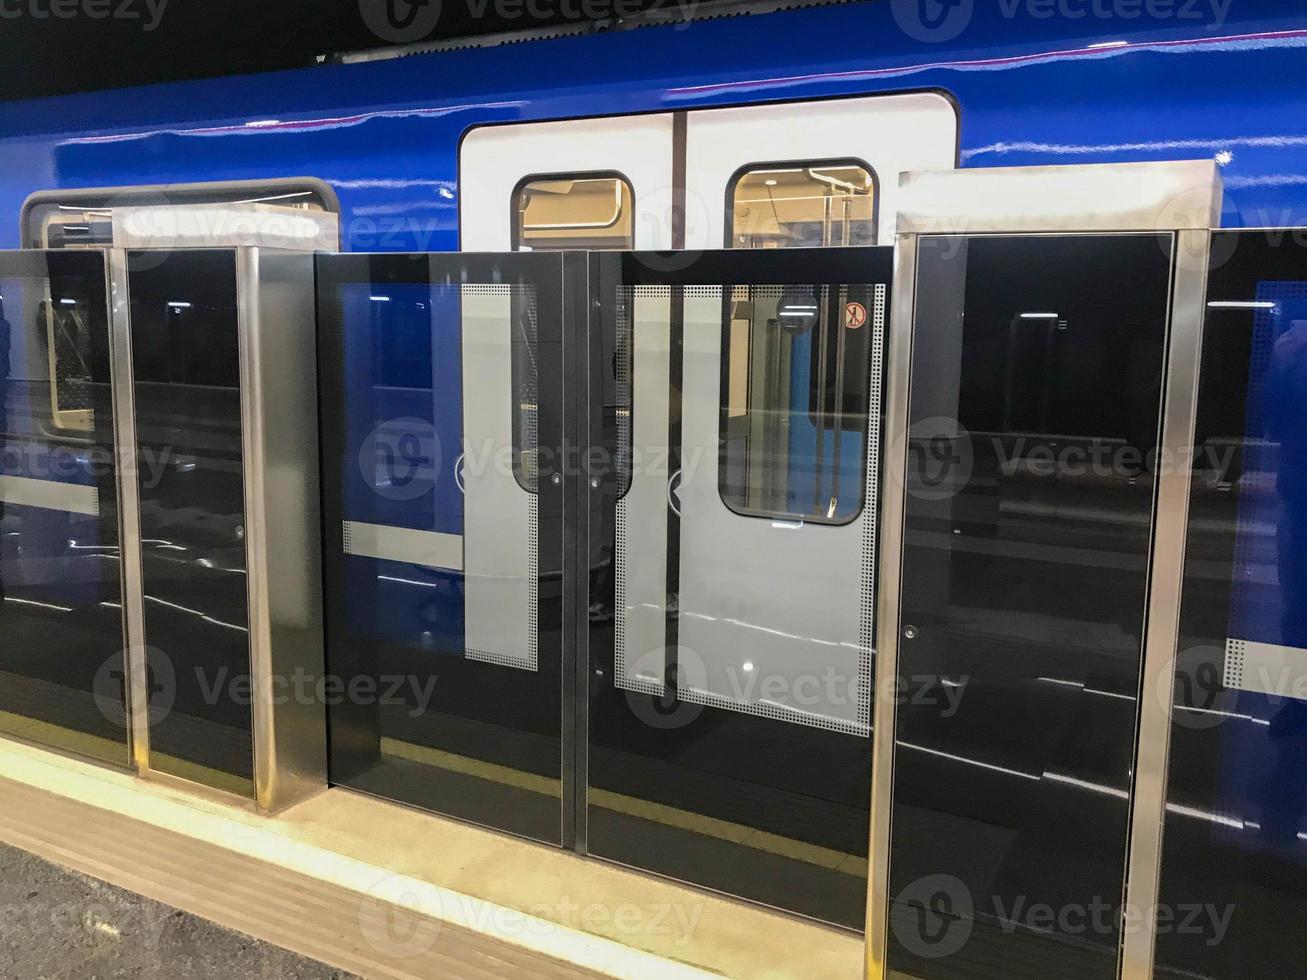 subway with increased security. new metro stations. double security, automatic doors before entering the train. a blue modern train with glass doors arrived on the way. boarding passengers photo